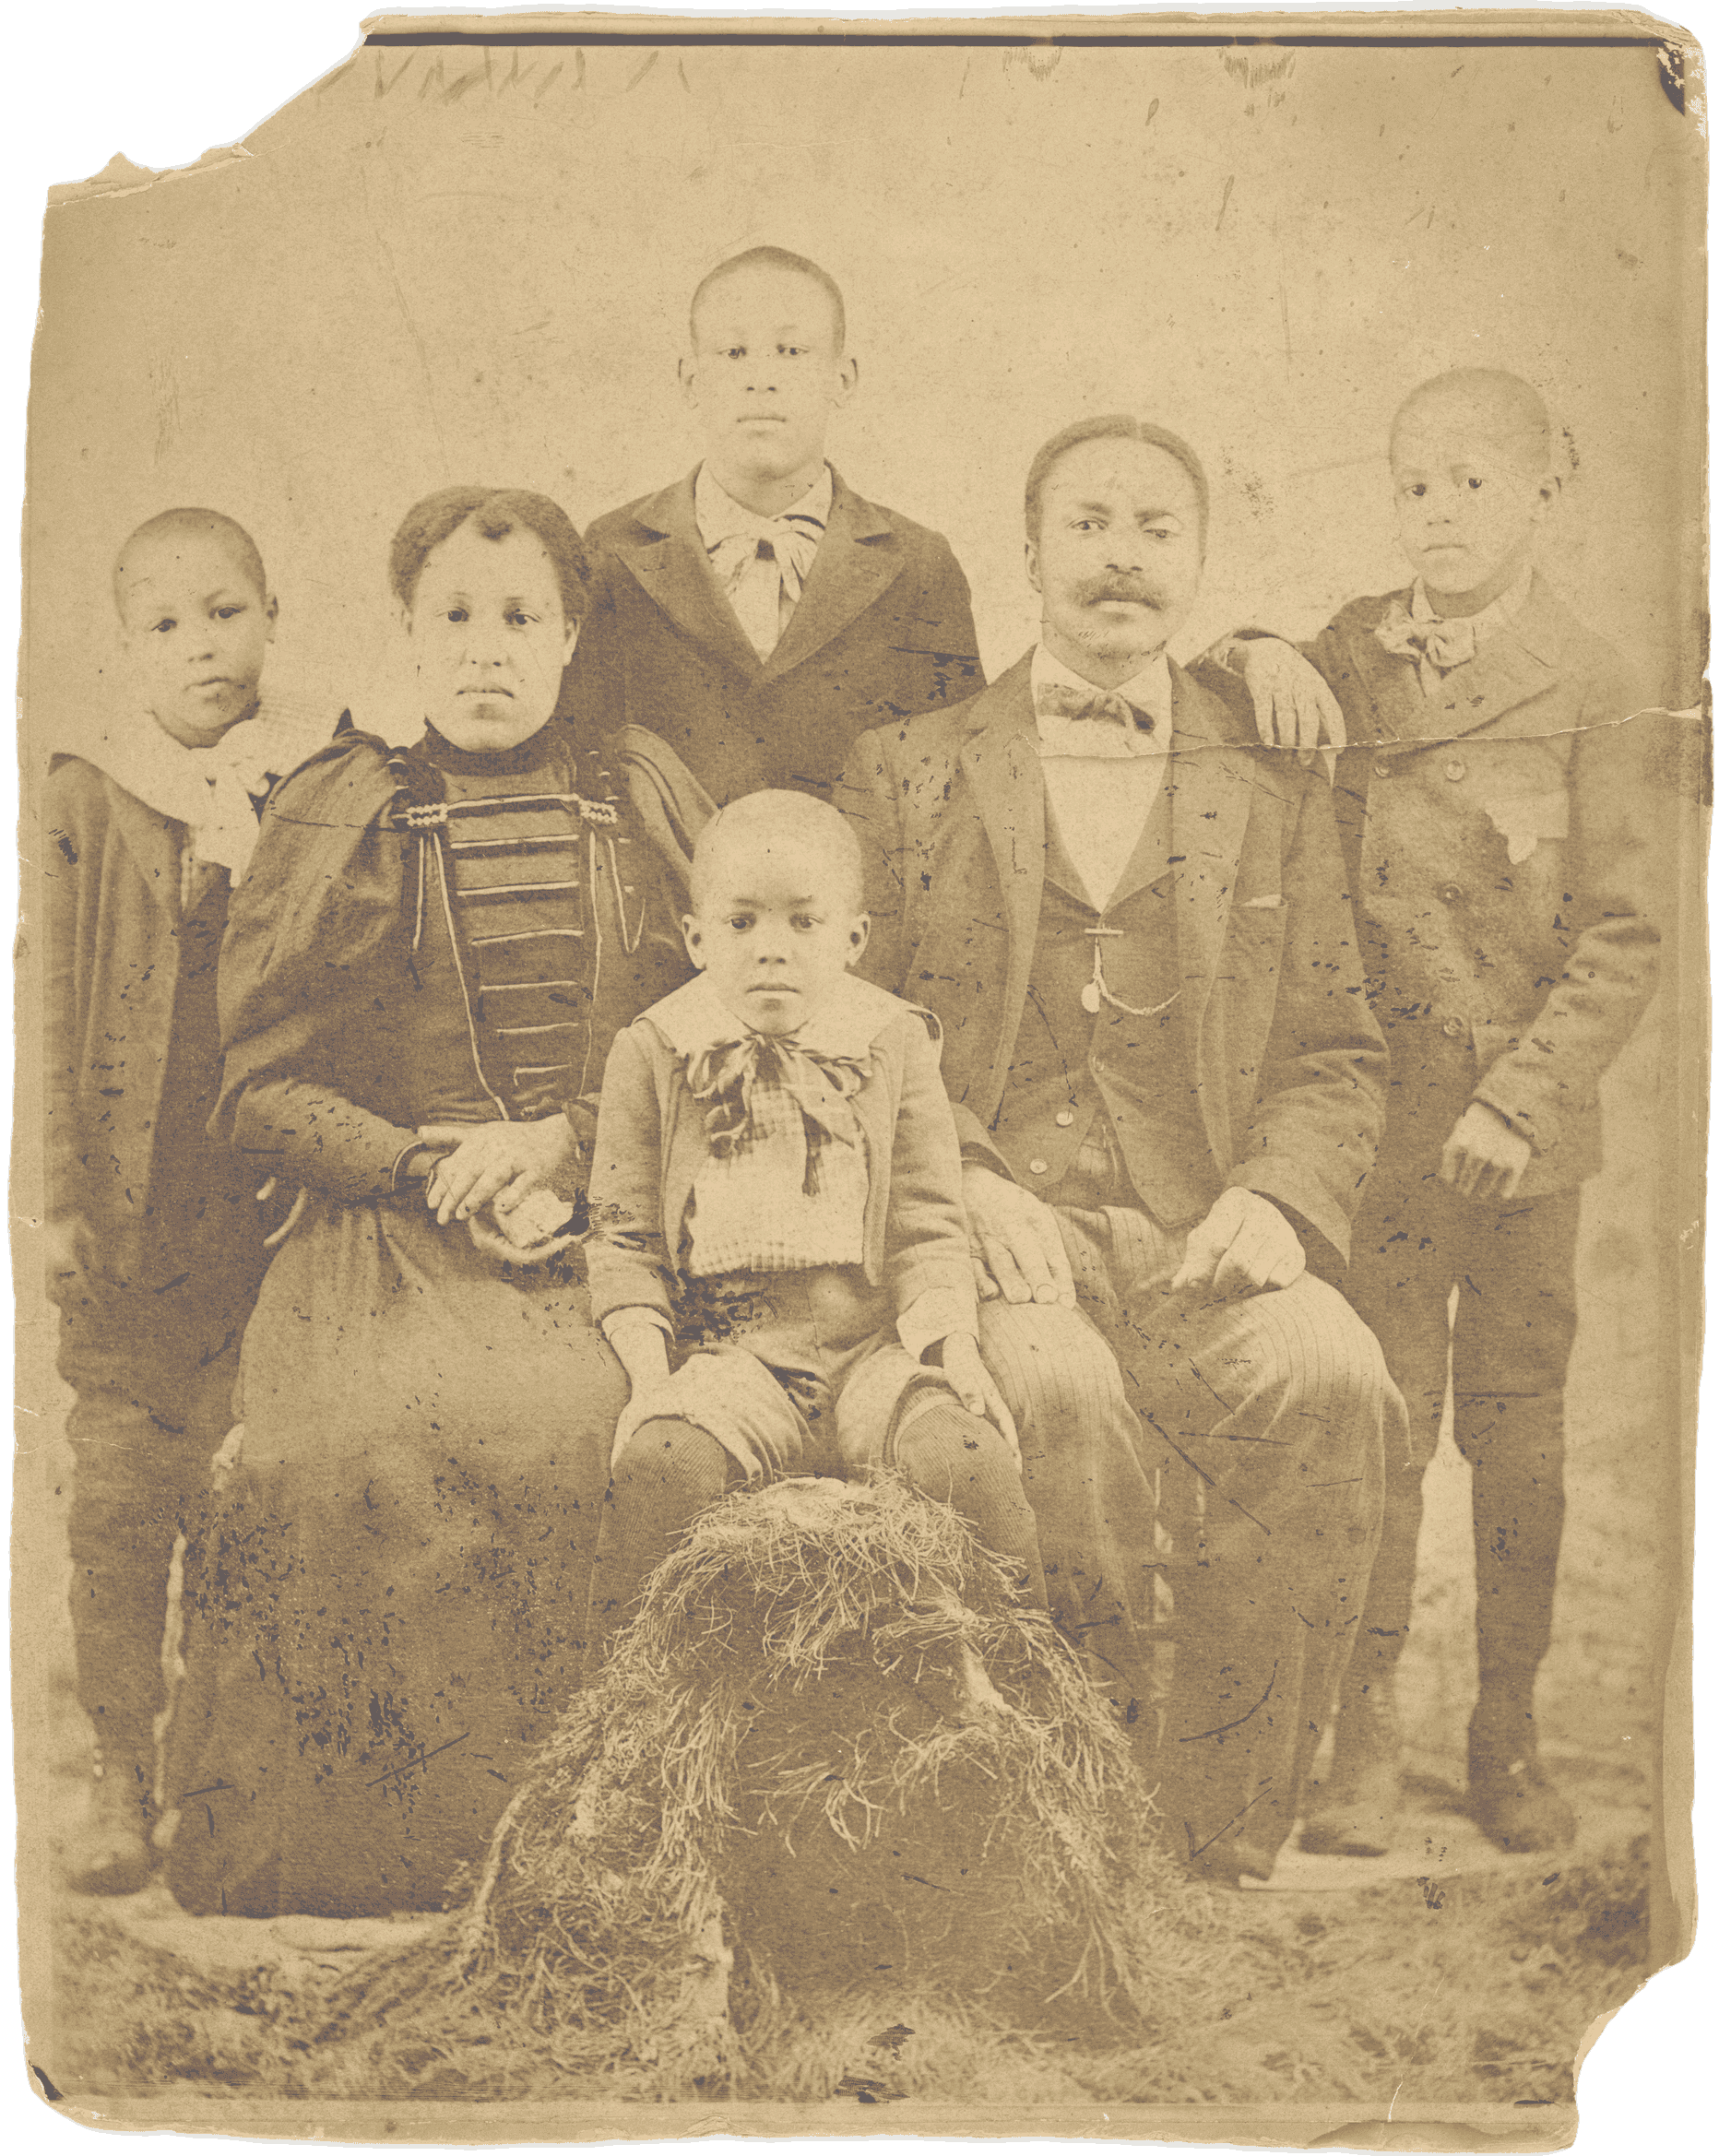 A sepia tone group portrait of a family with the two parents and 4 sons. They are looking at the camera.